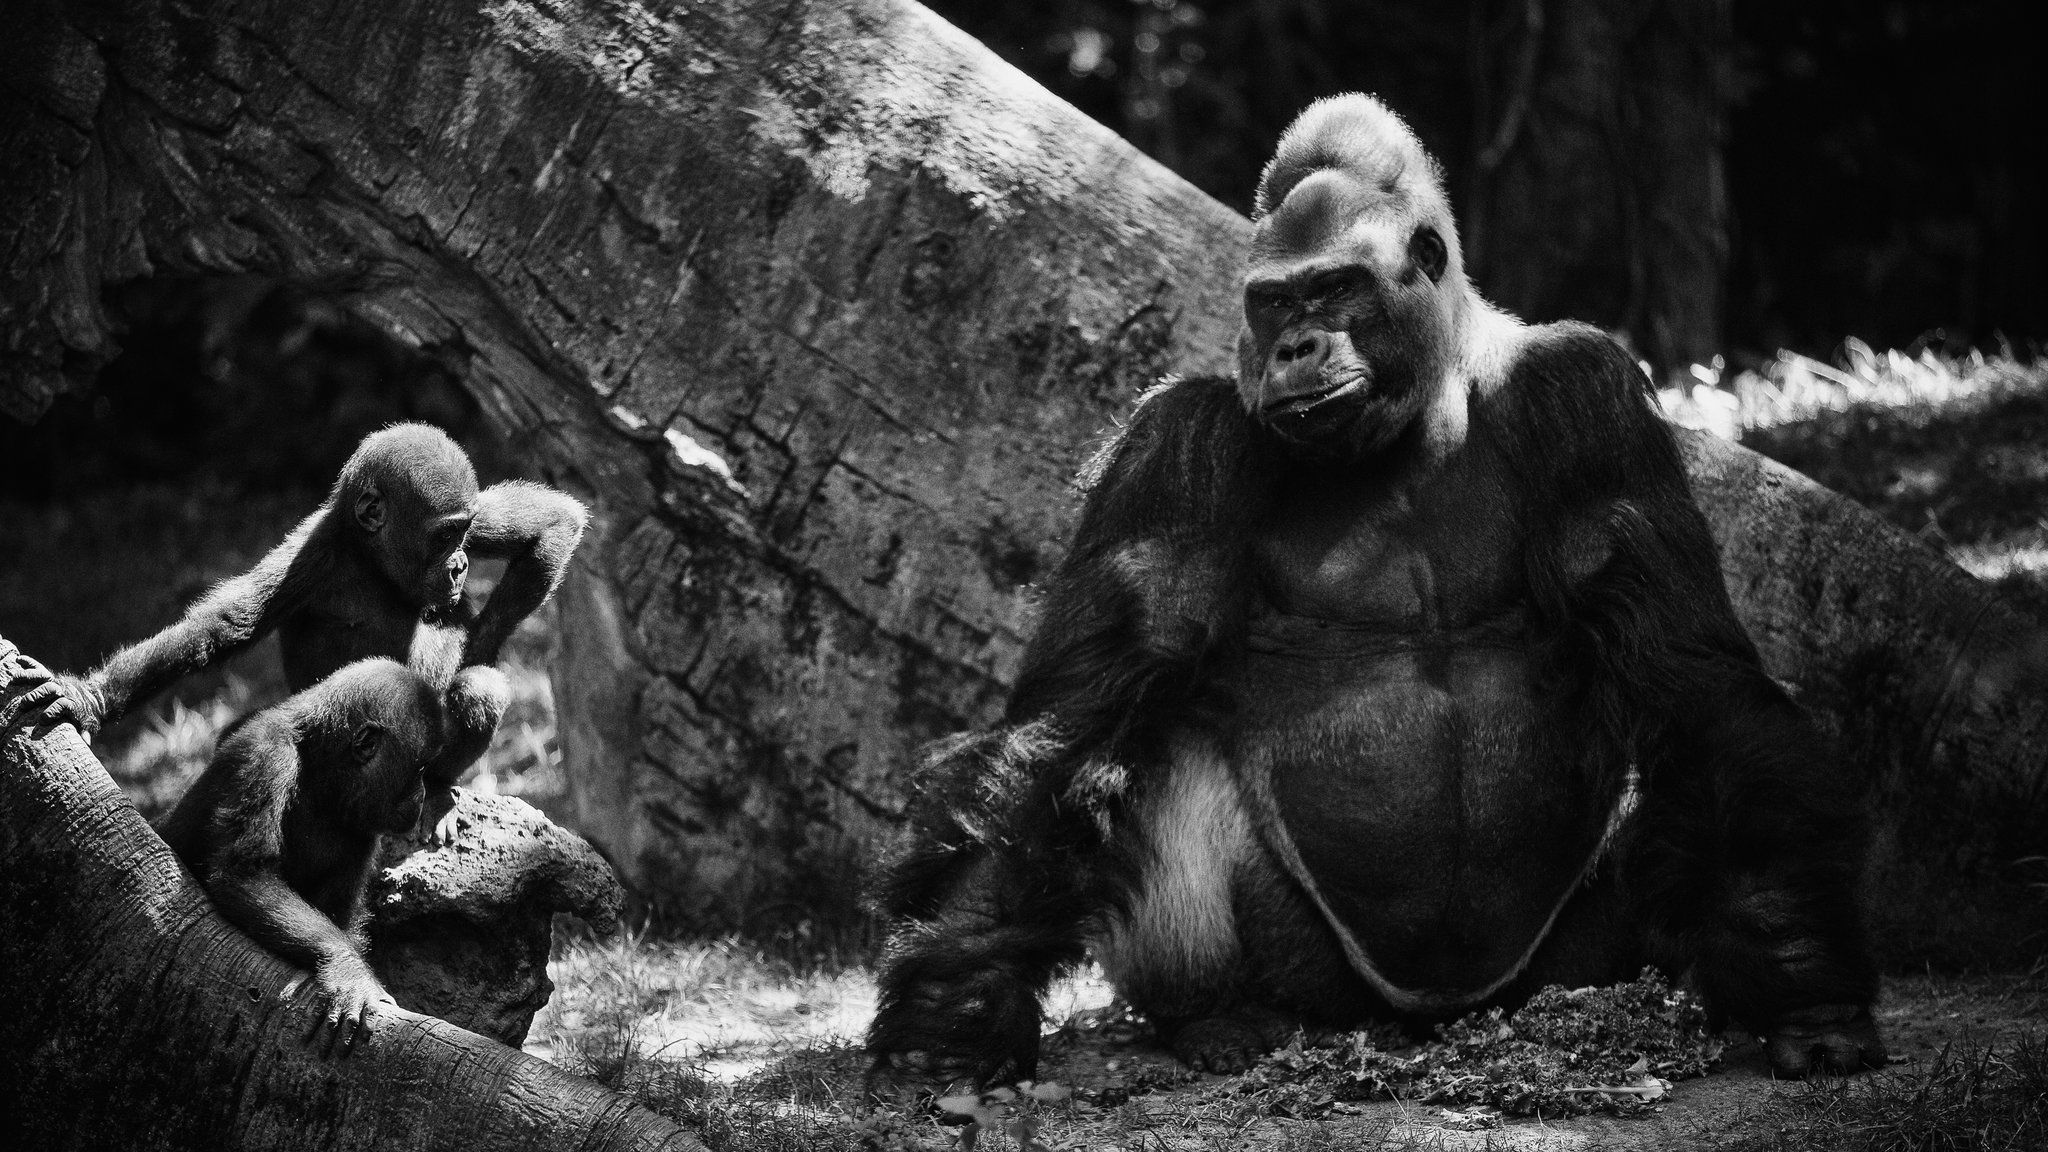 A Gorilla Match (or 5) at the Bronx Zoo